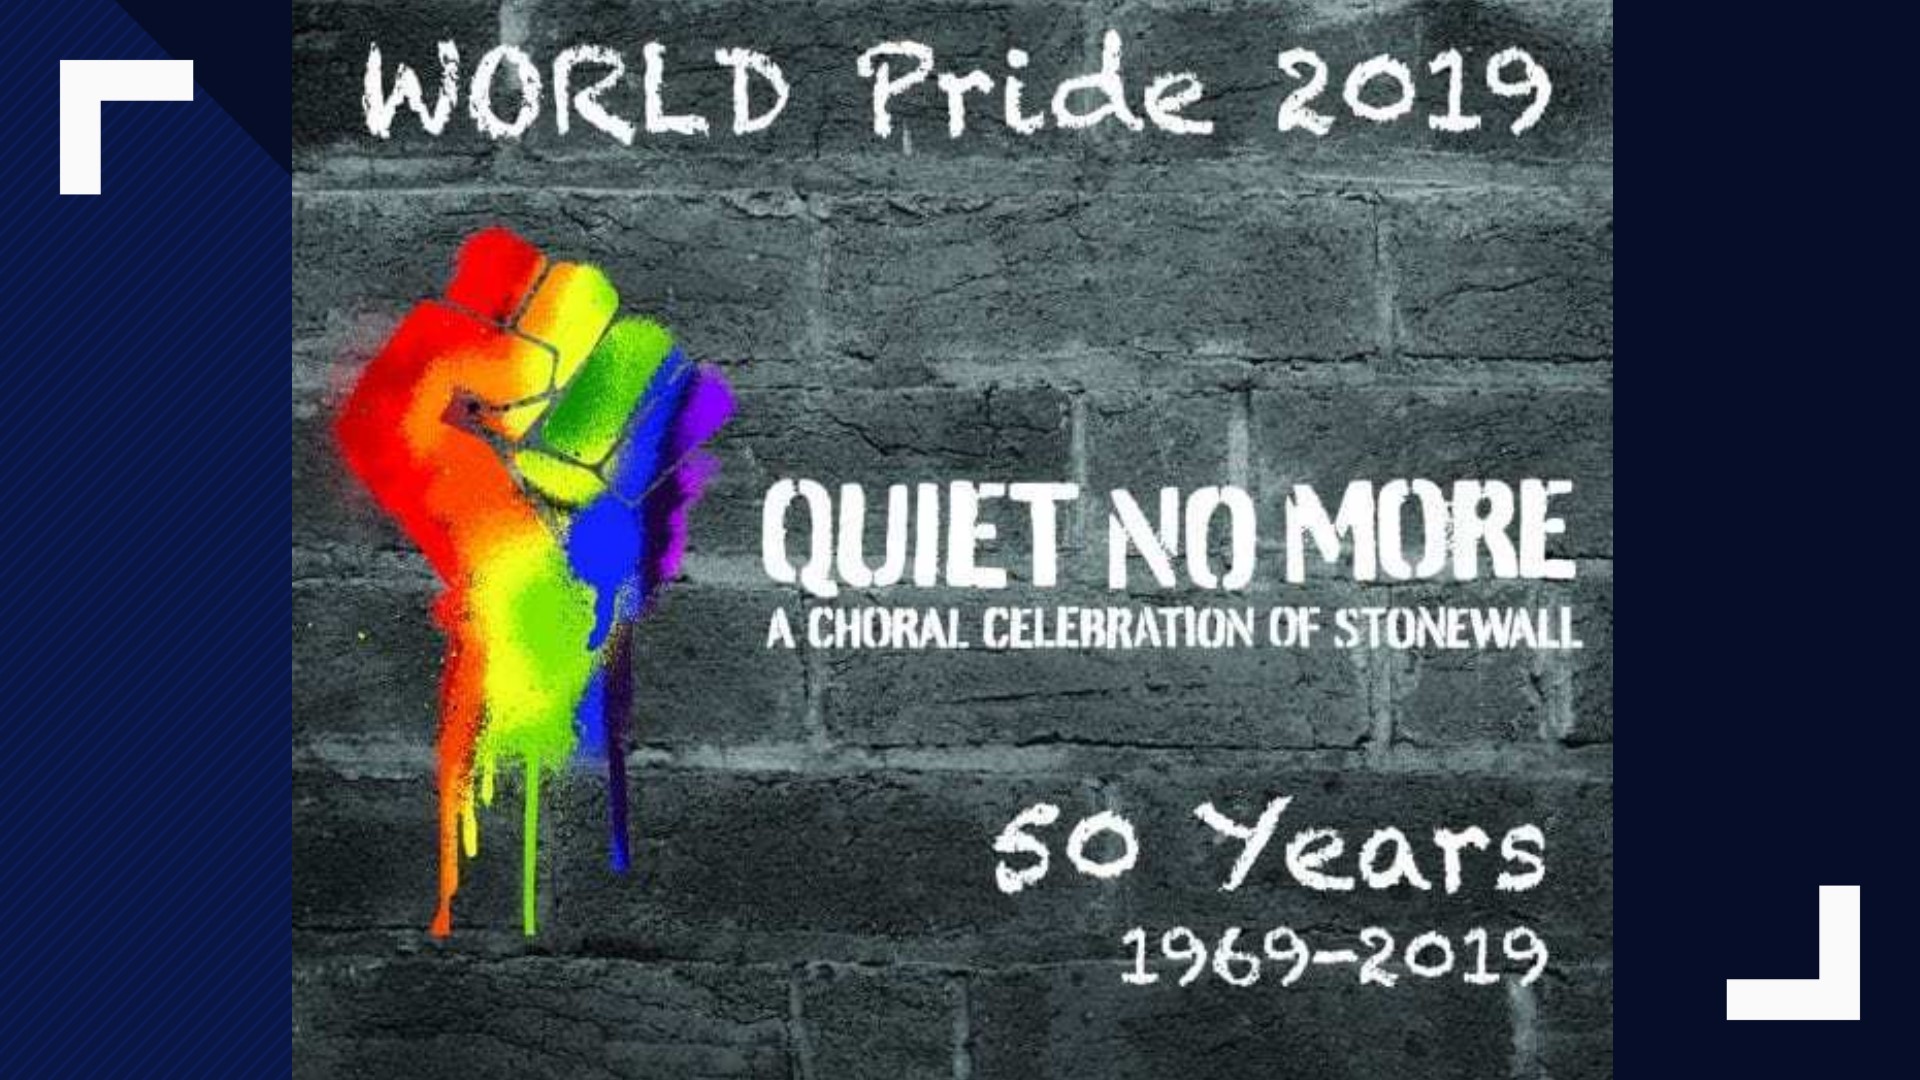 "Quiet No More: A Choral Commemoration of Stonewall" will be performed at the King Center at Auraria campus on June 7 and 8. Tickets are available at RMArts.com/DGMC for the concerts.